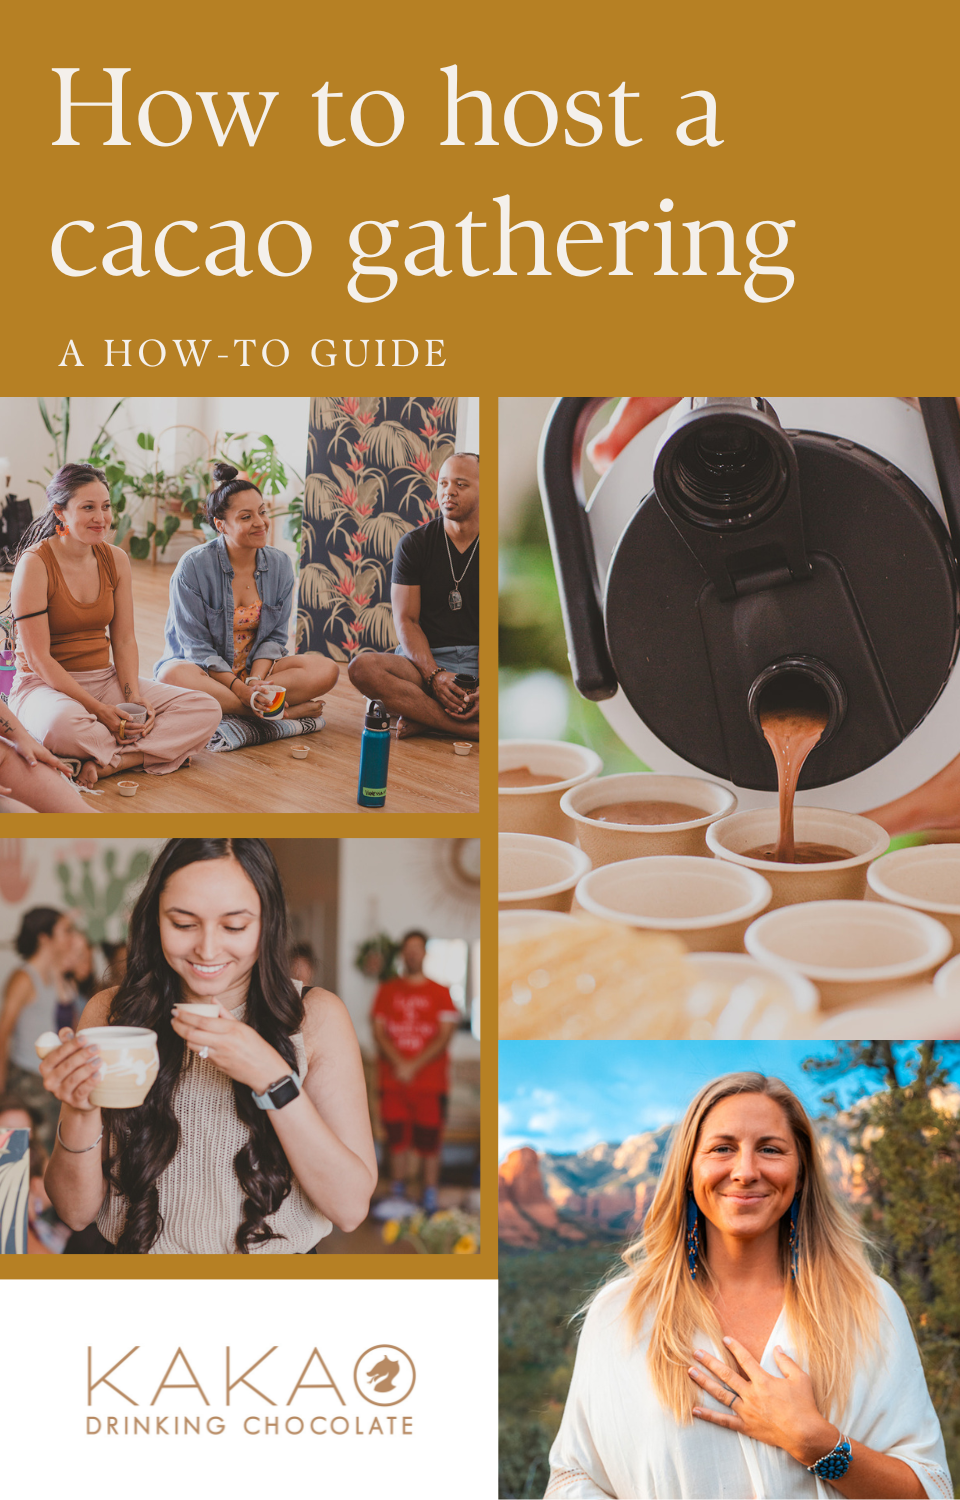 INTRO GUIDE: How To Host A Cacao Gathering